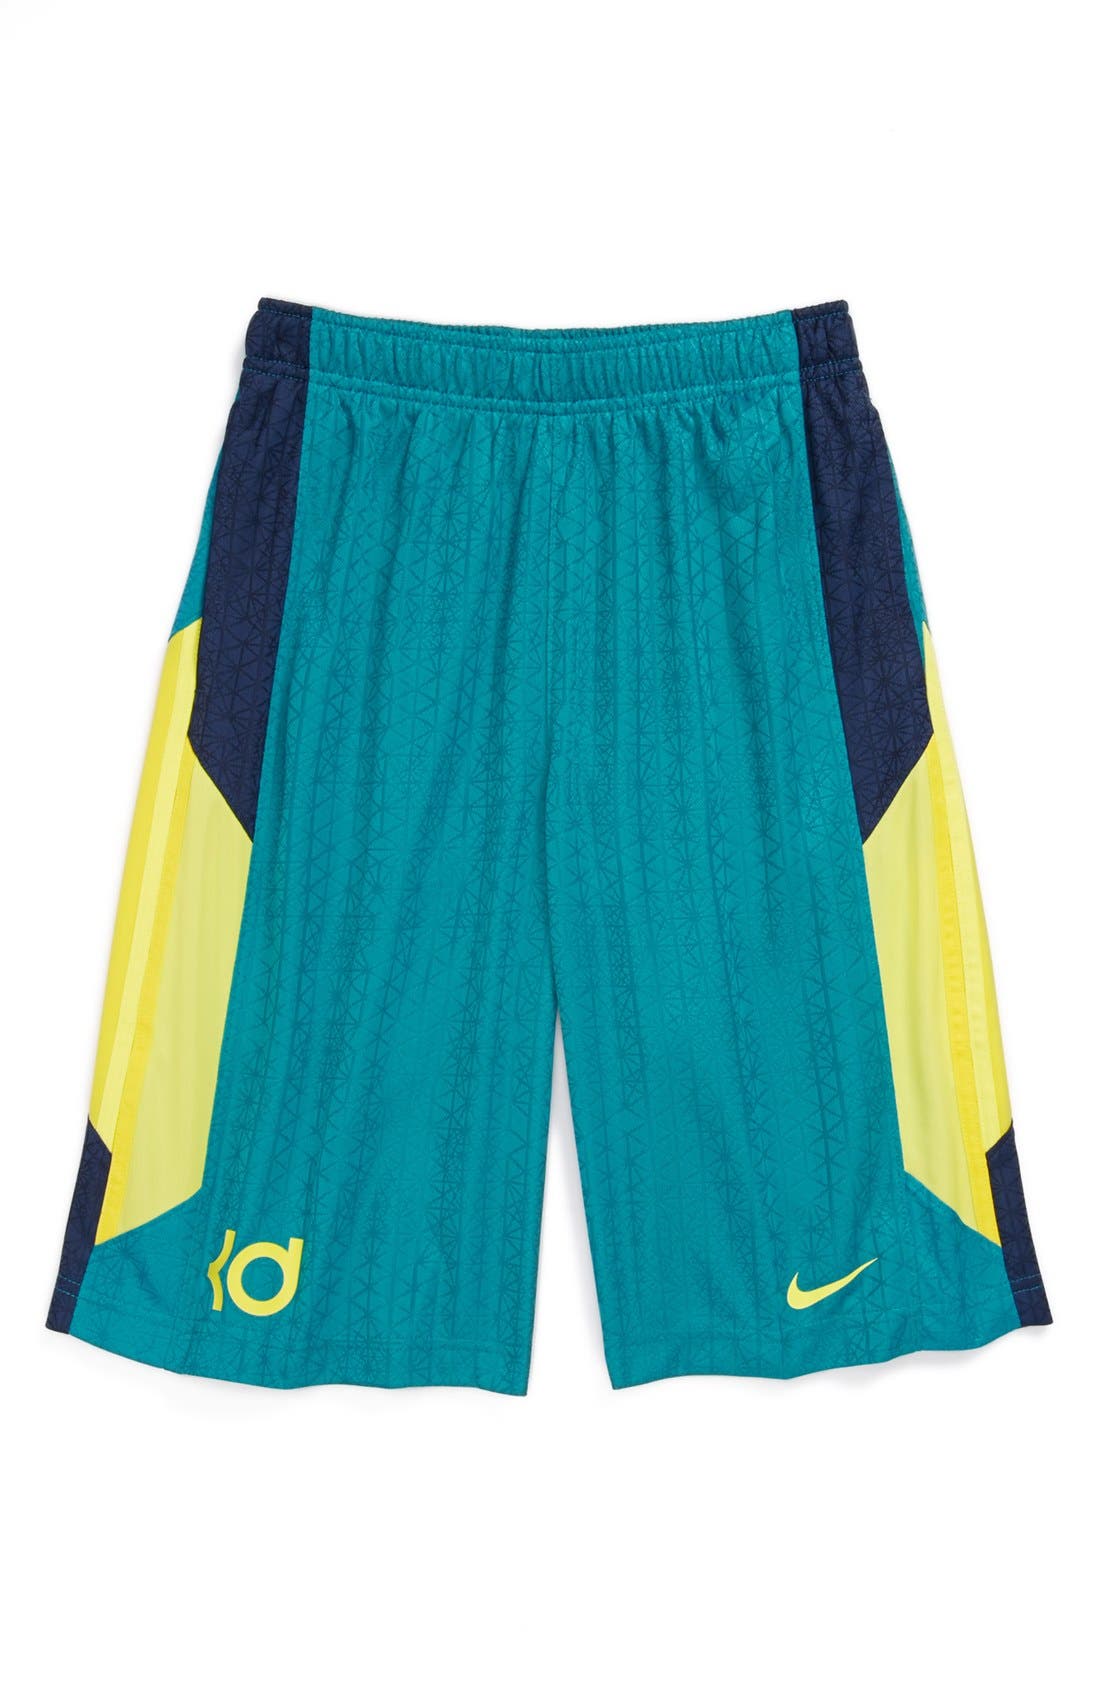 kd easter shorts